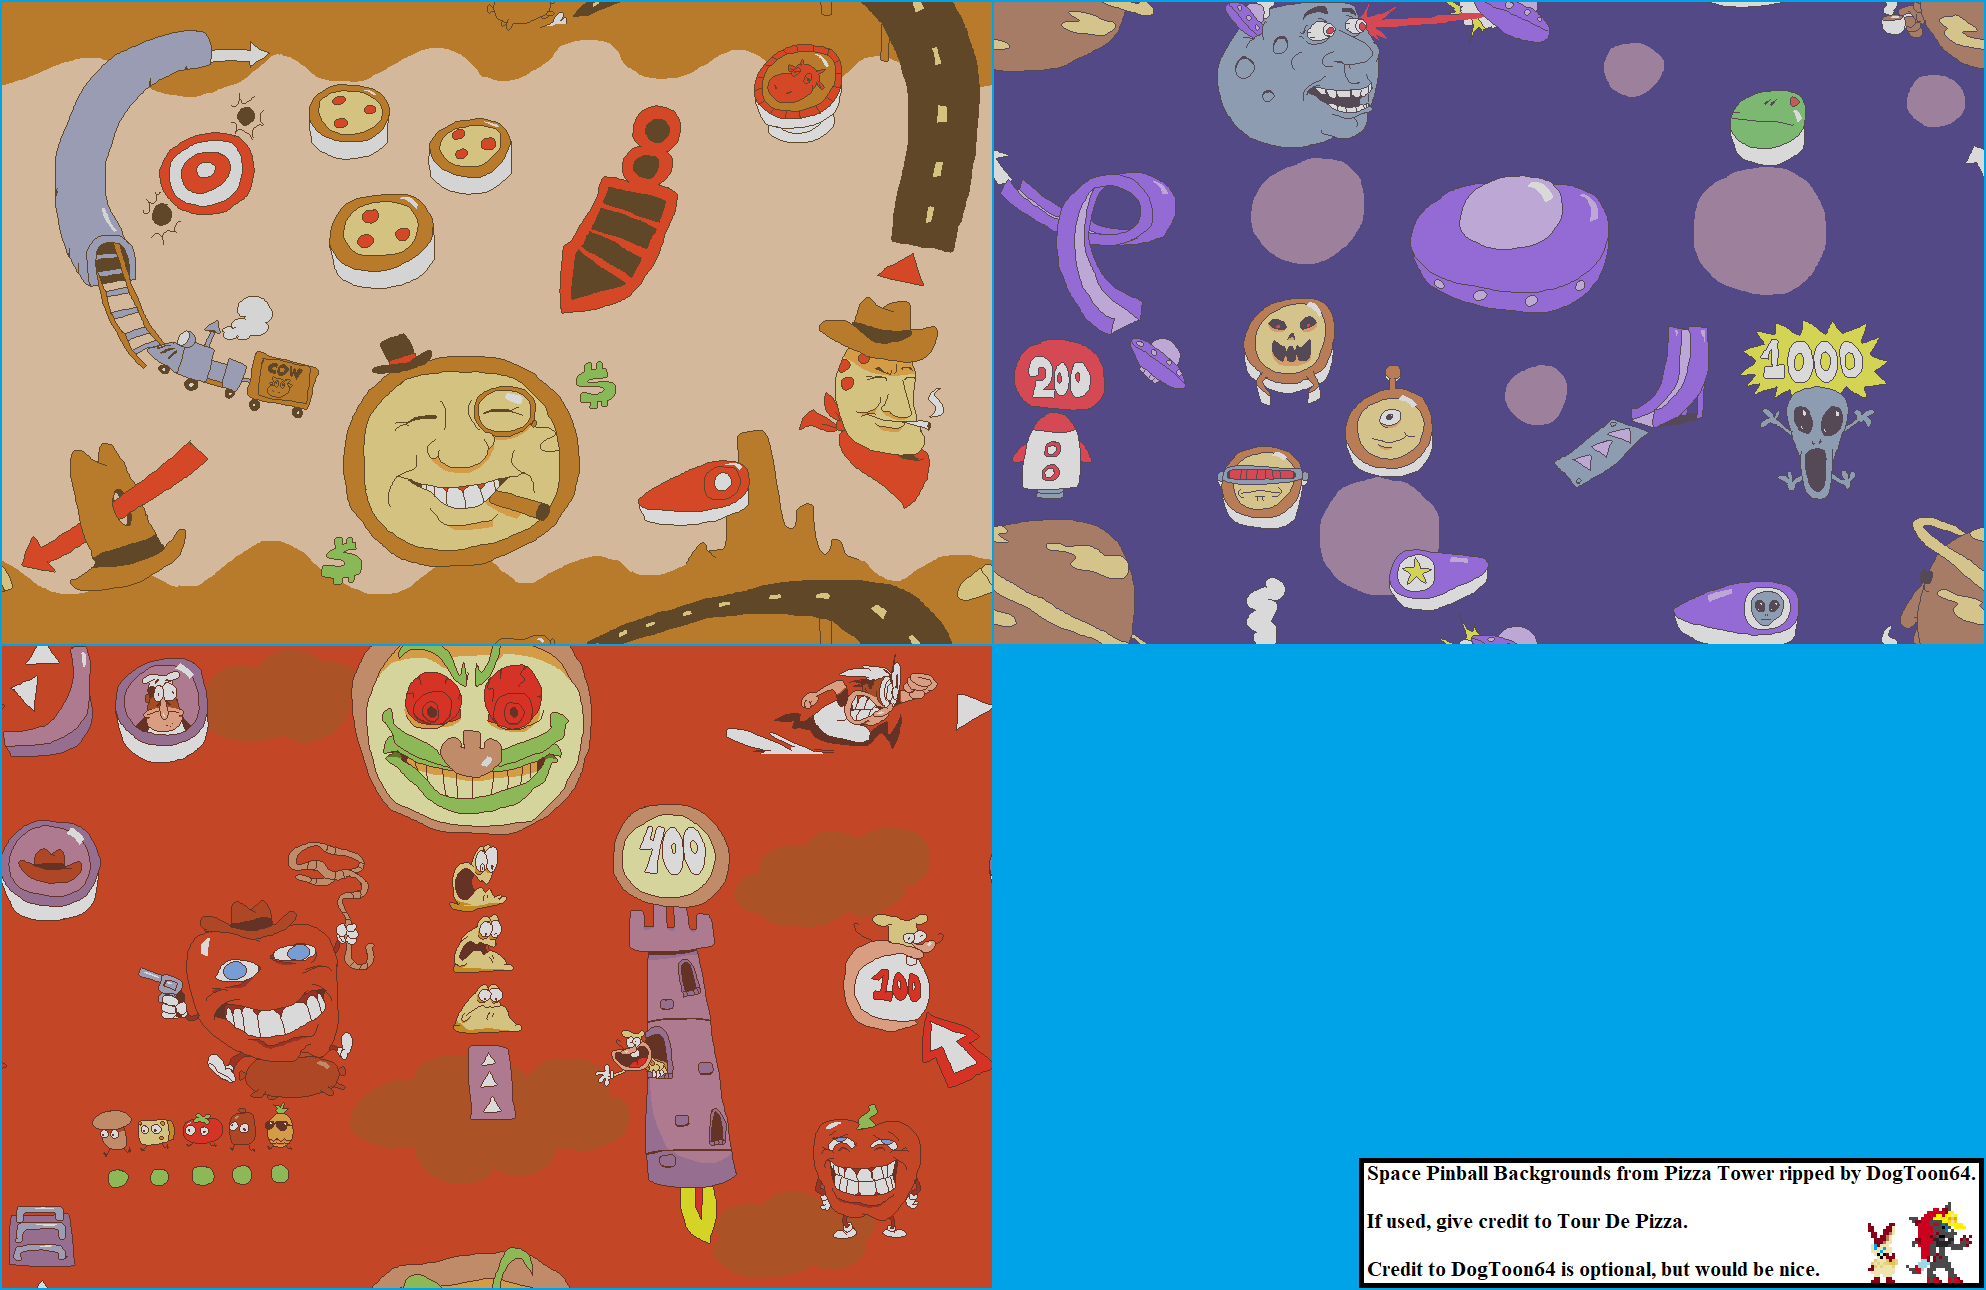 Chef Task Room 1-3 / Space Pinball Backgrounds